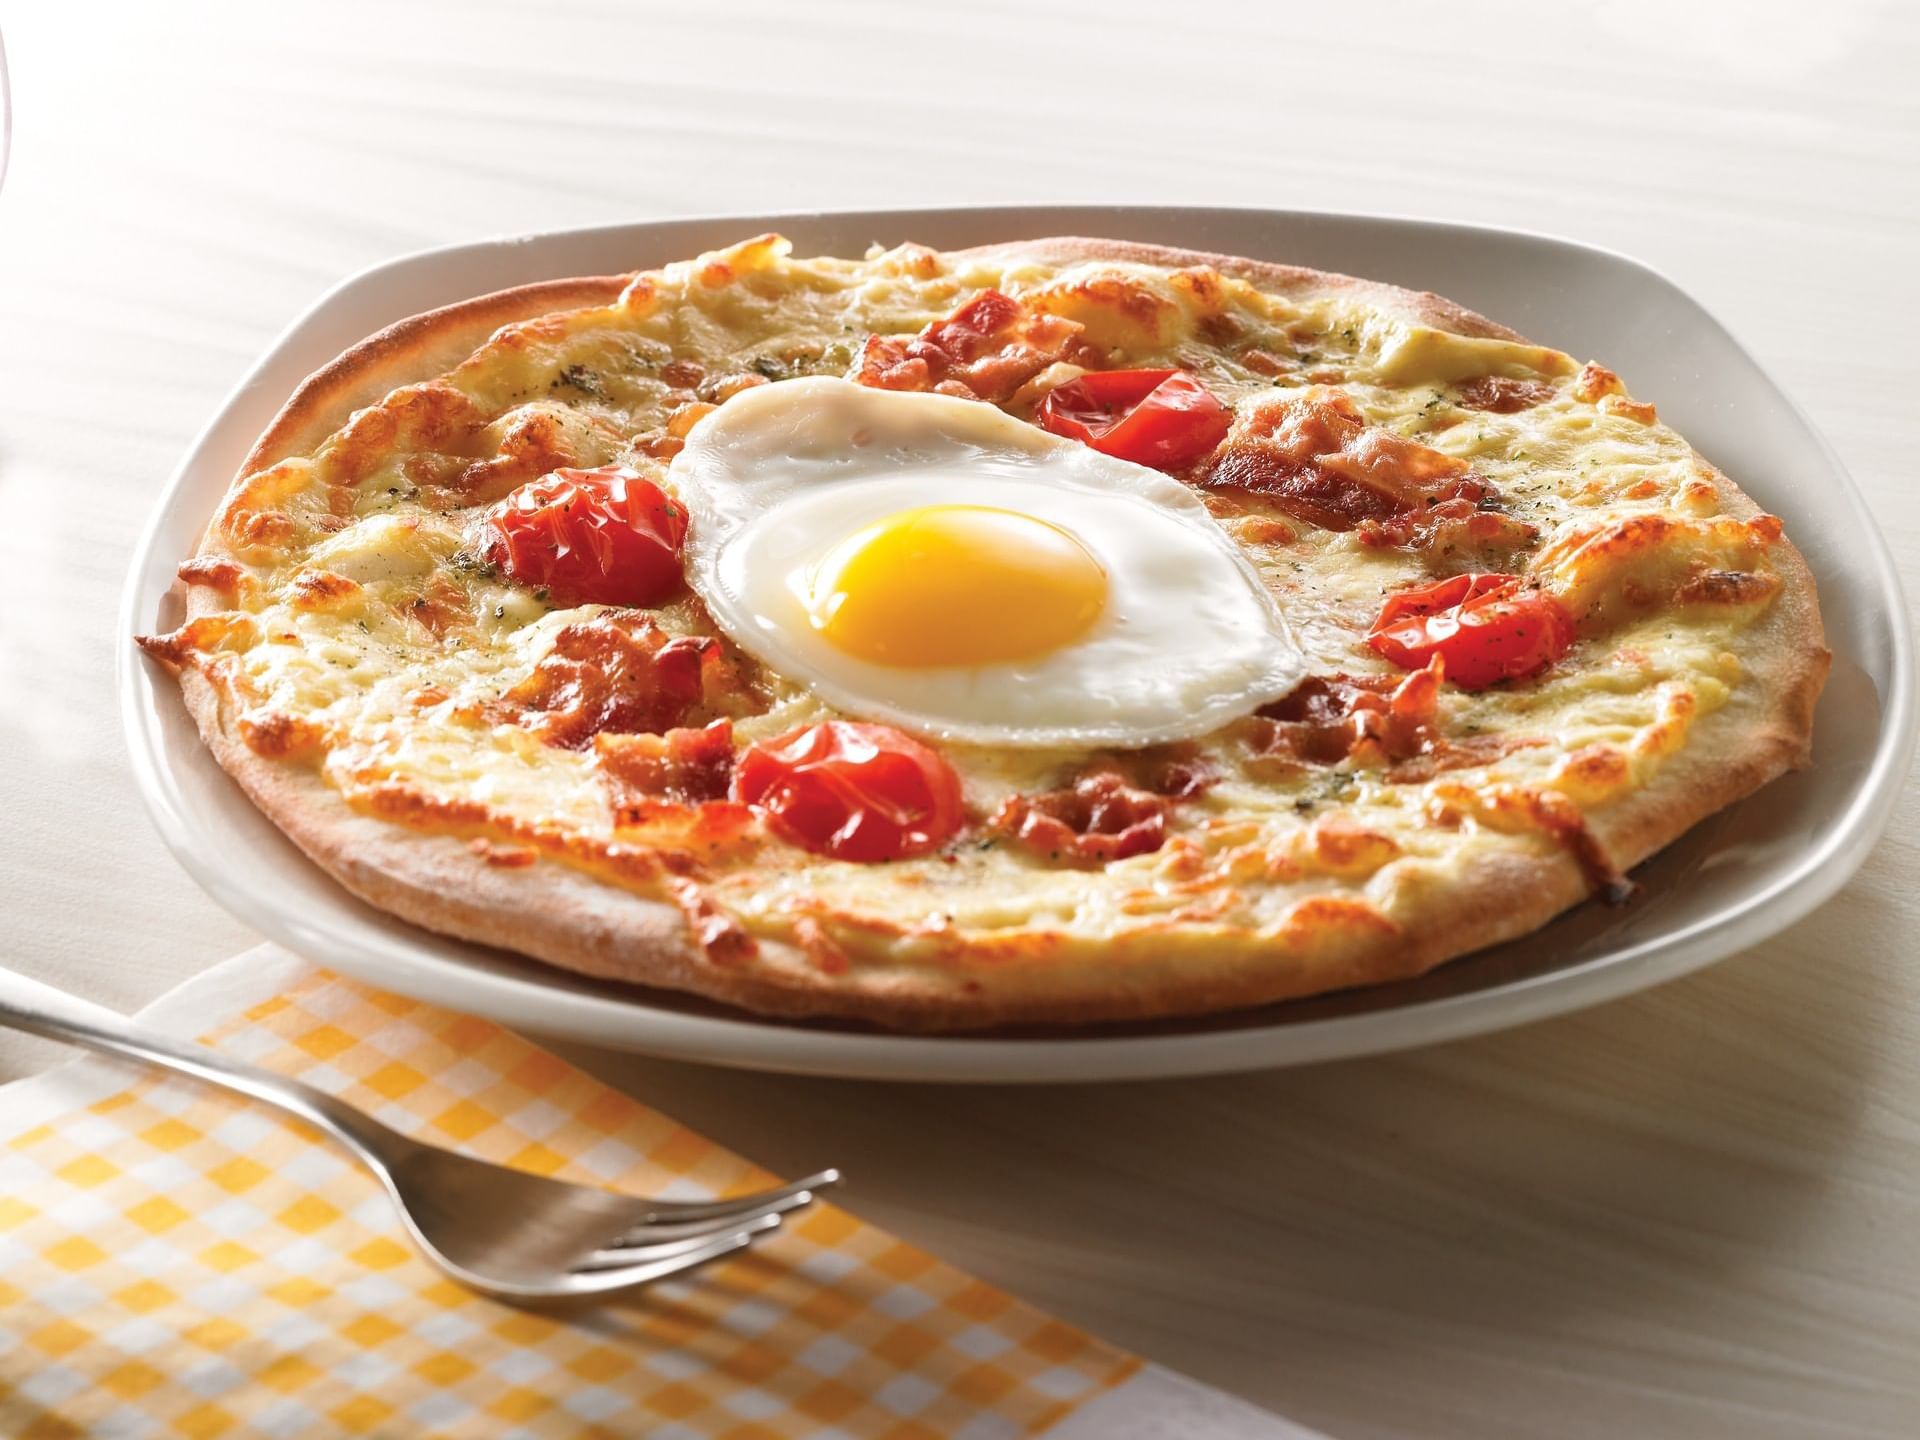 A fine breakfast pizza served at Clique Hotels & Resorts